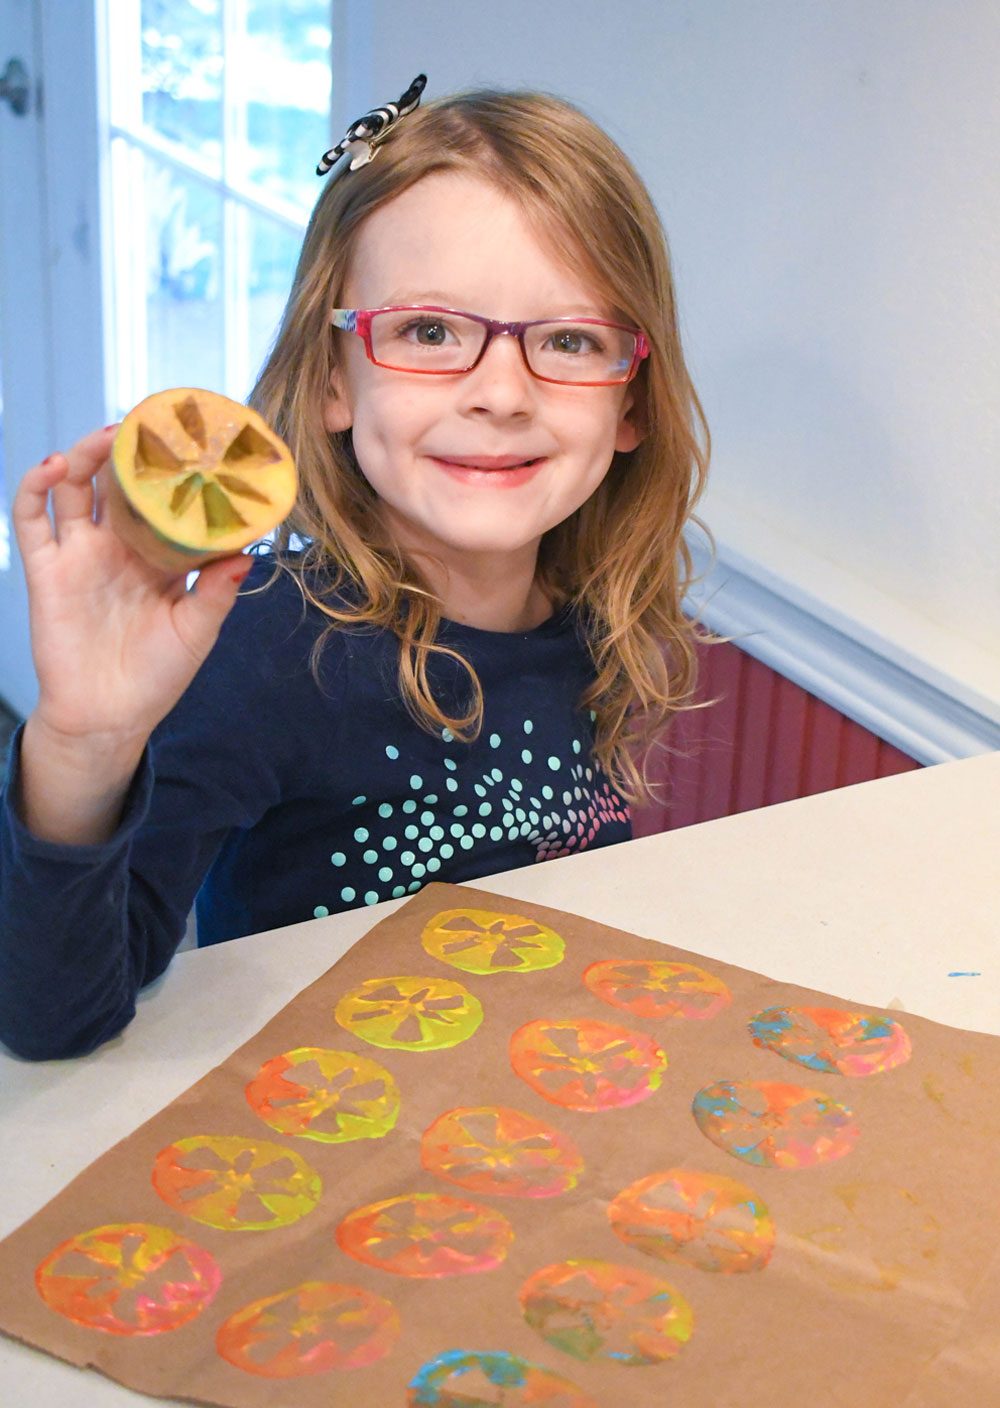 Make your own designs with colorful potato stamps!